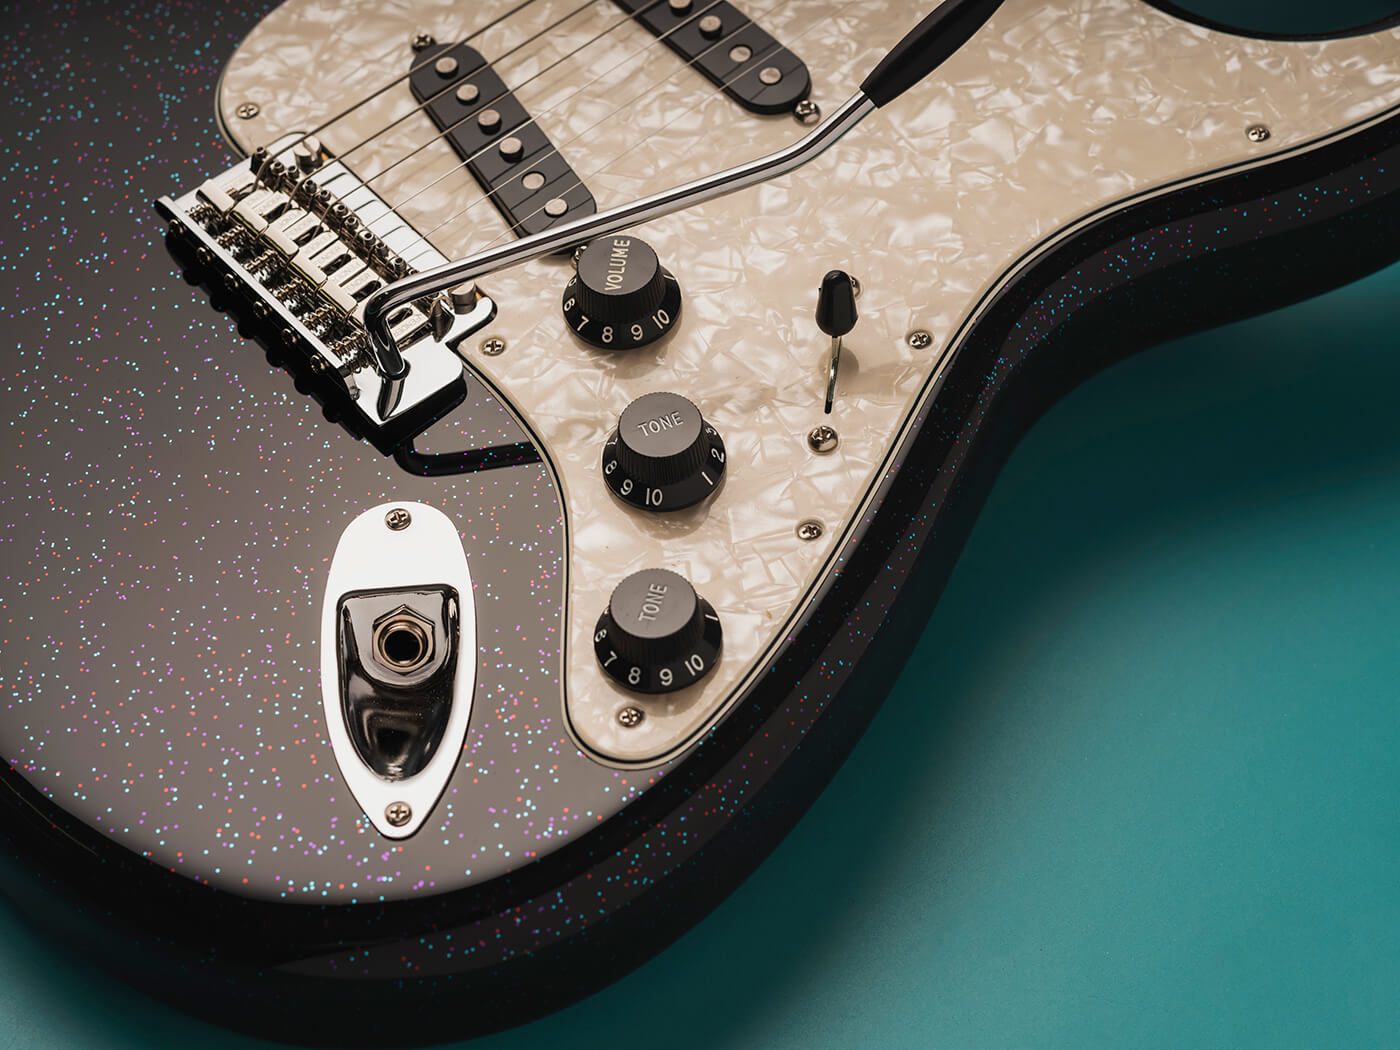 70th Anniversary Player Stratocaster control knobs, photo by Adam Gasson